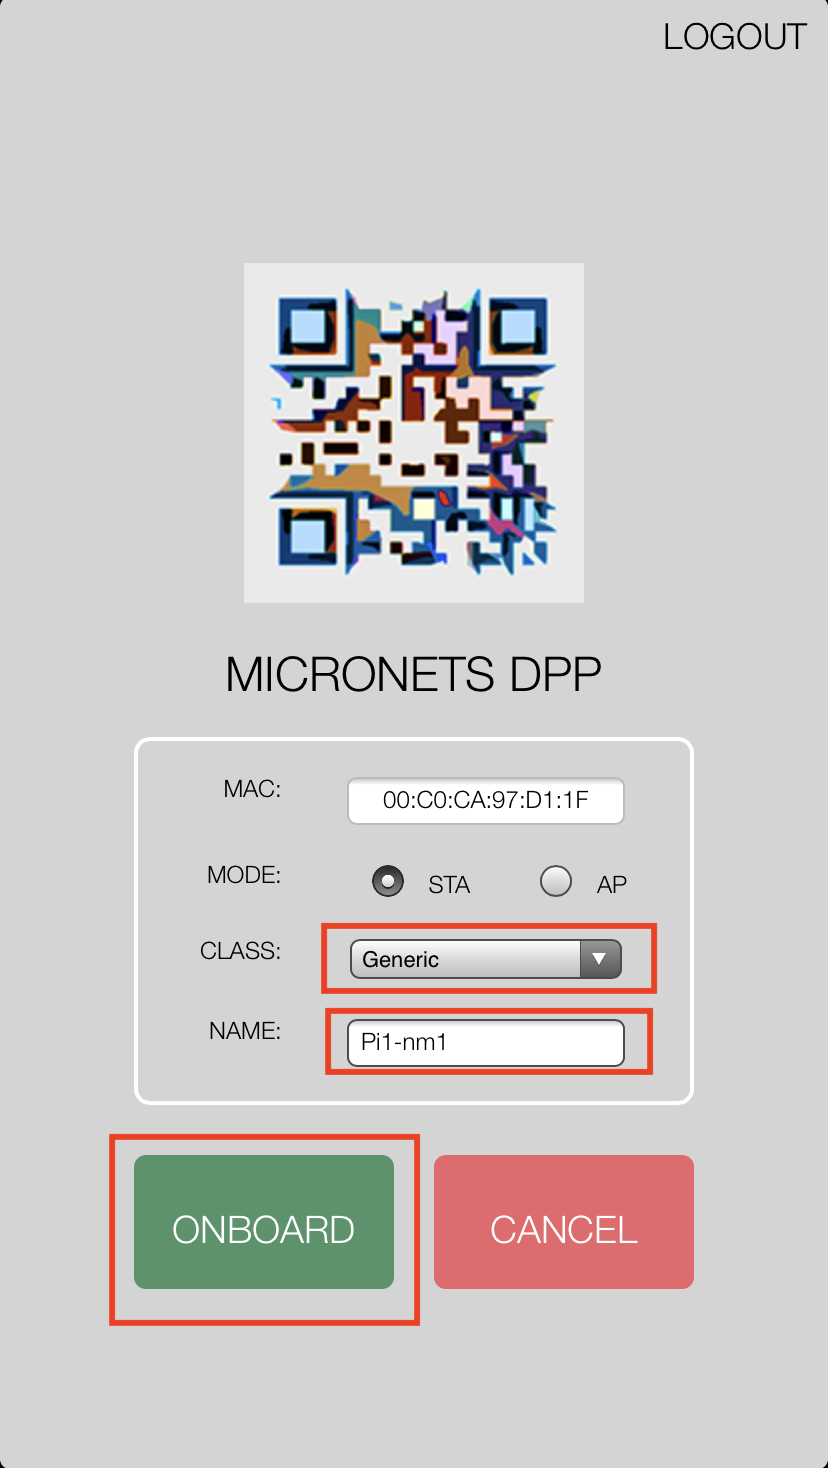 A screenshot of the micronets mobile application with the onboarding form page displayed and populated with device information and micronet class.